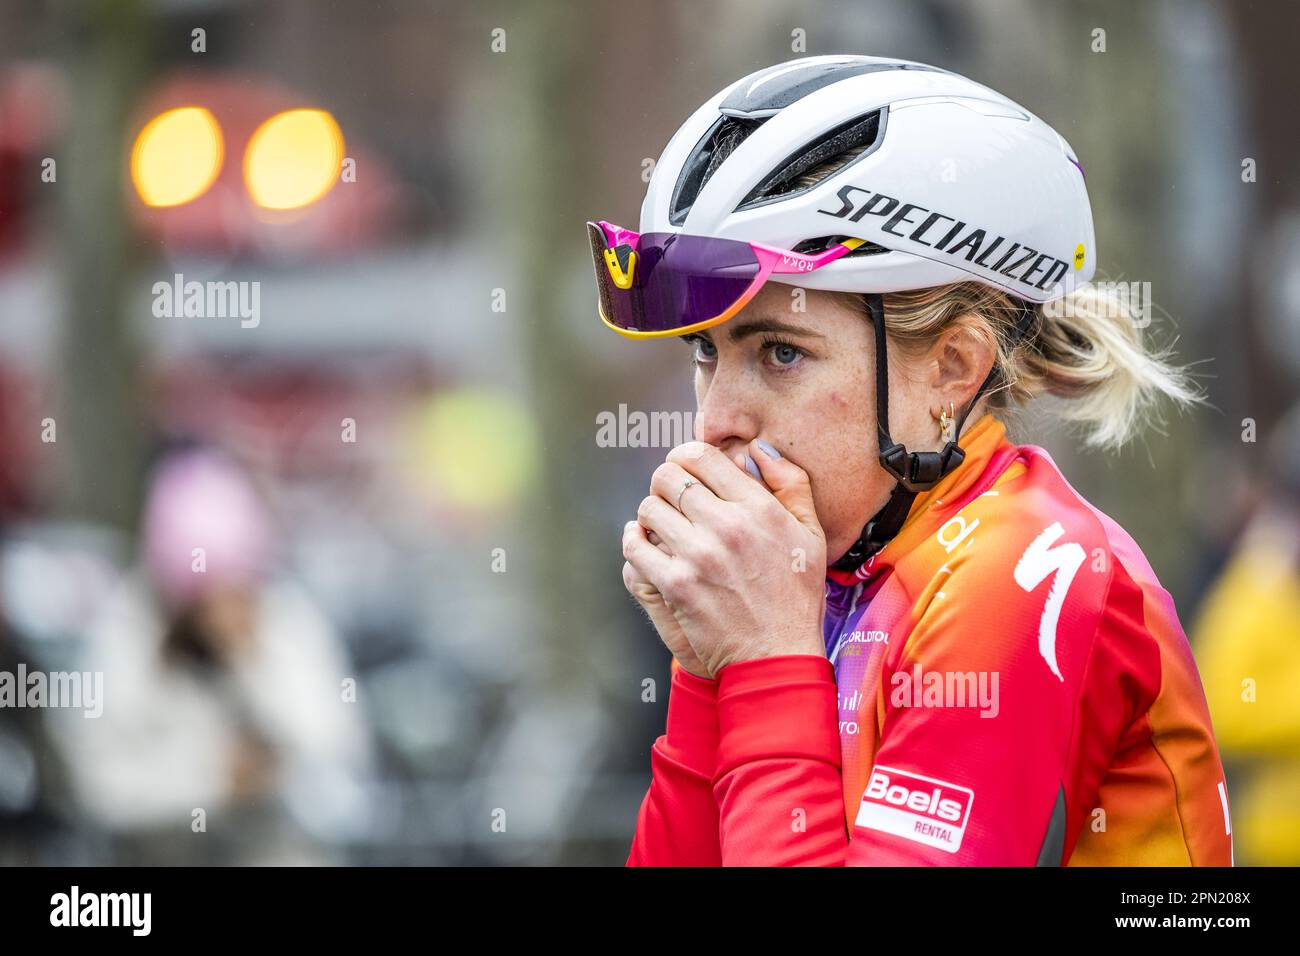 MAASTRICHT - Demi Vollering prior to the start of the Amstel Gold Race  Ladies edition on April 16, 2023 in Maastricht, Netherlands. ANP MARCEL VAN  HOORN netherlands out - belgium out Credit: